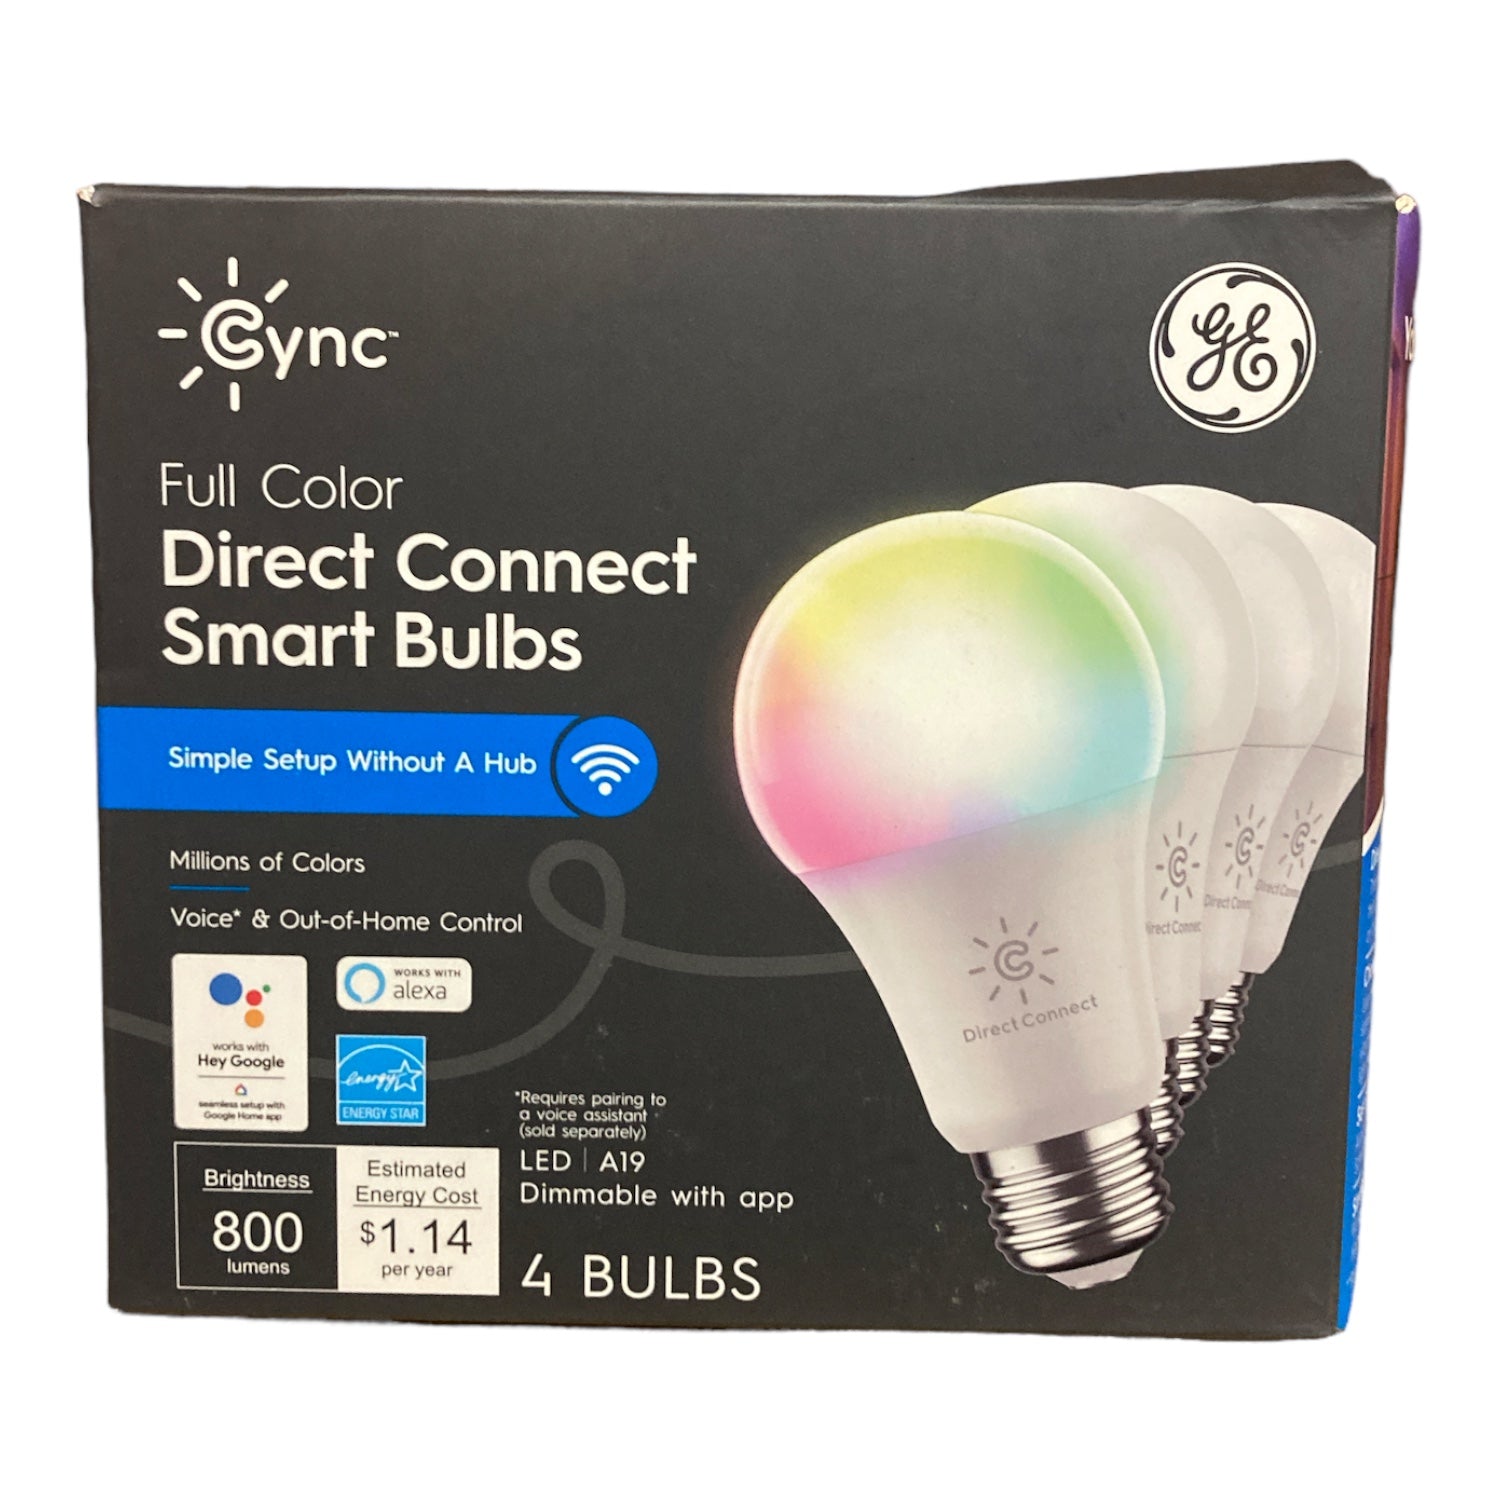 GE Cync LED 9W (60W Replacement) Smart Home Full Color A19 Smart Bulbs (4 Ct)